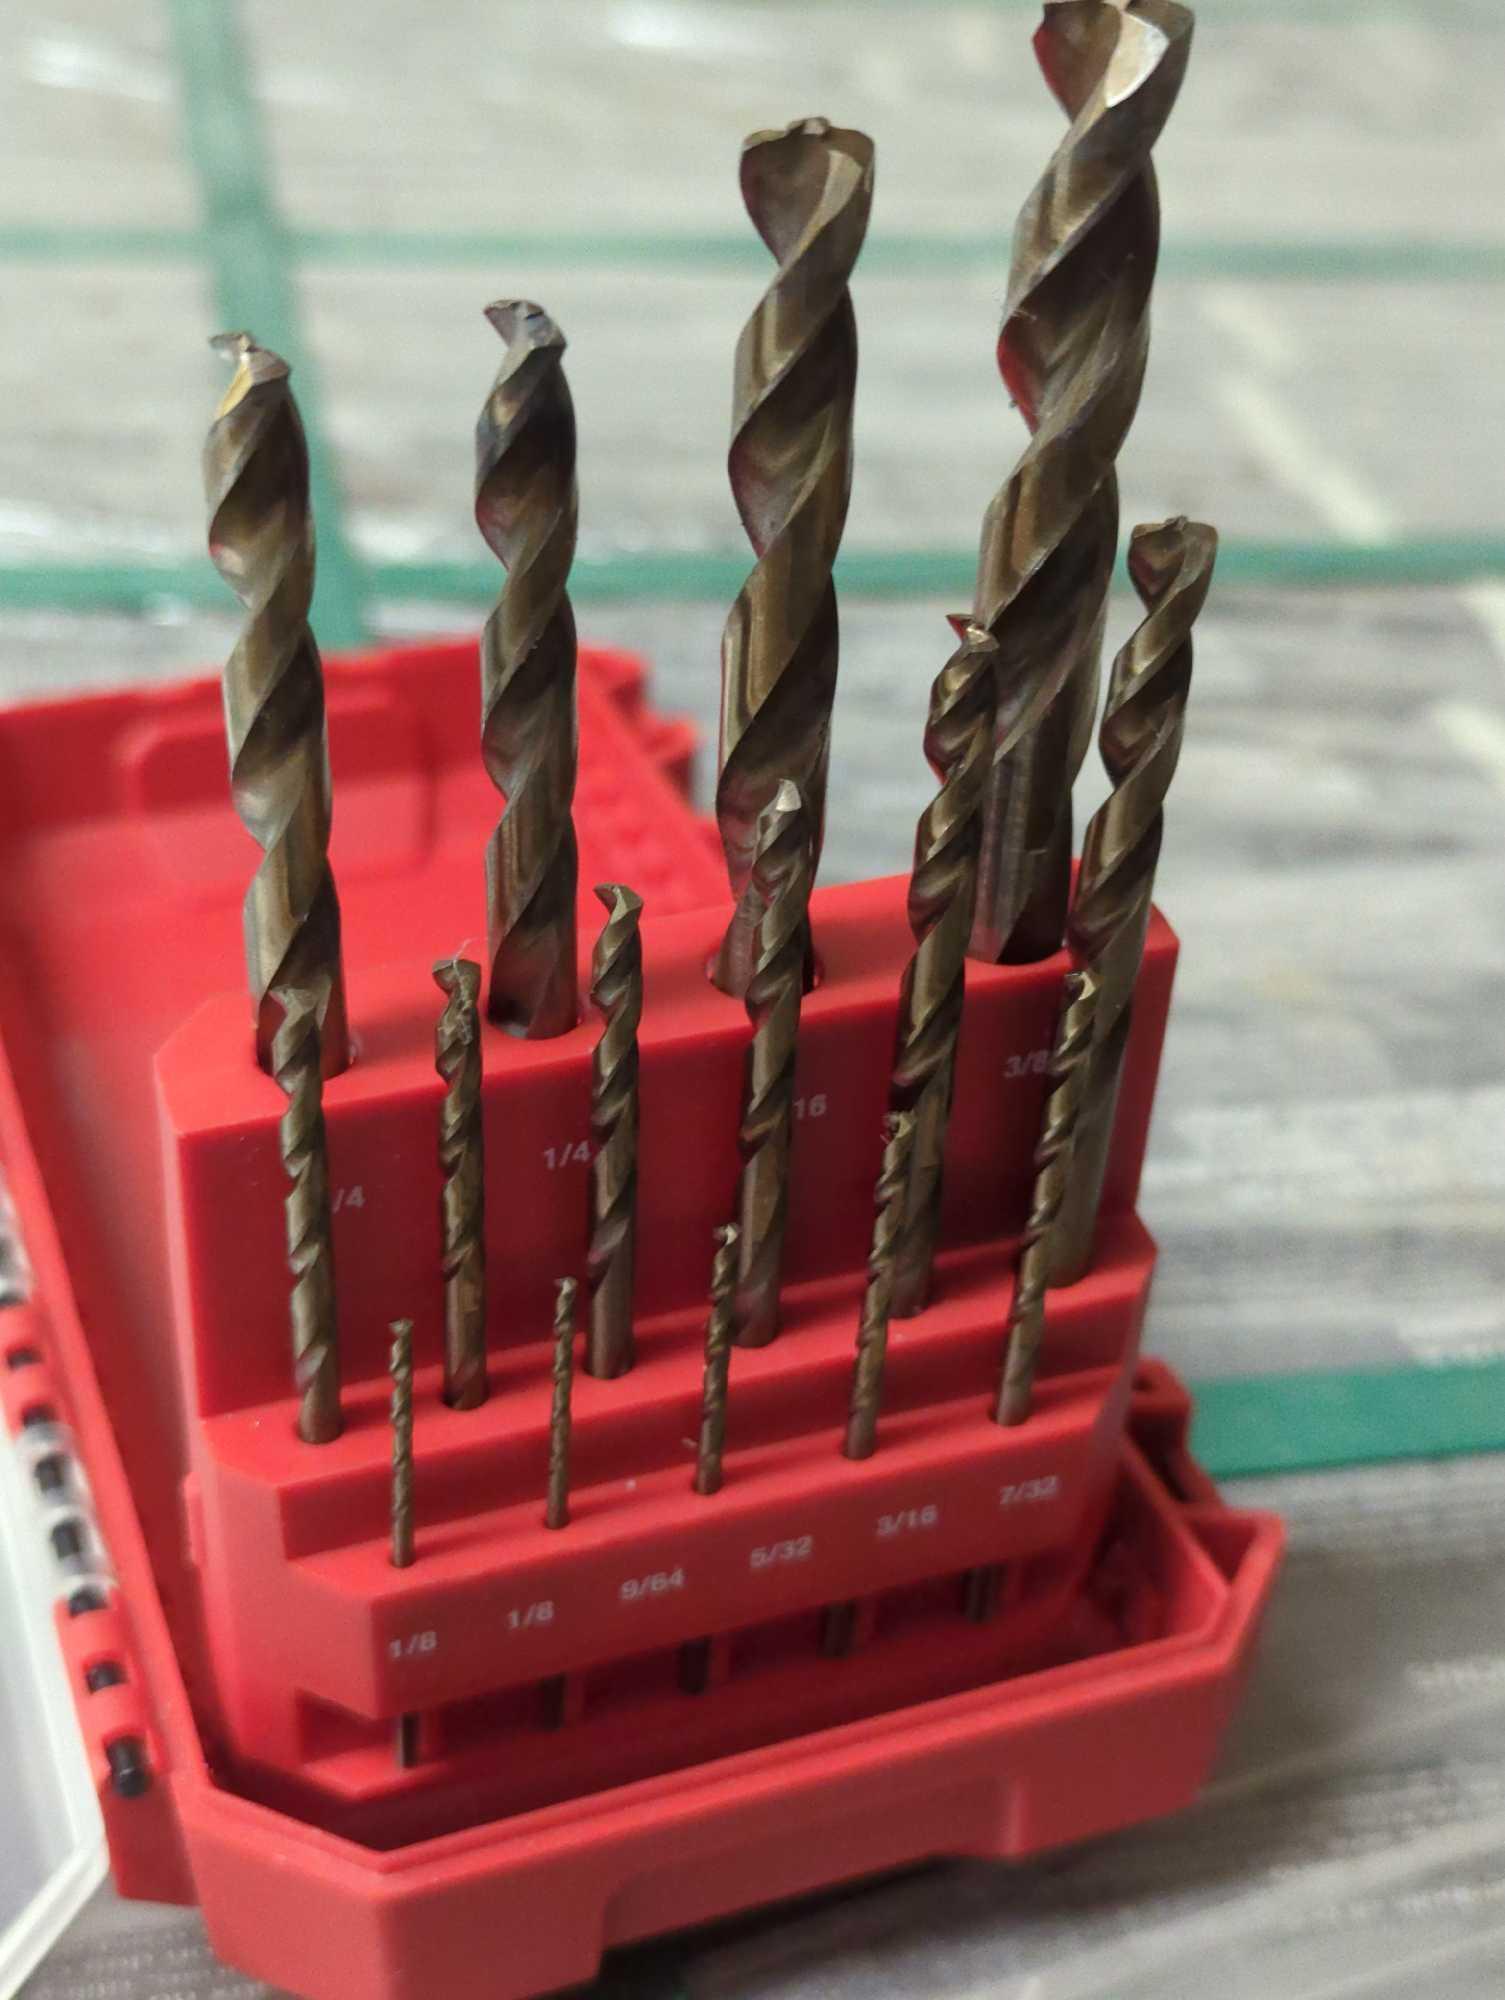 Milwaukee Cobalt Red Helix Drill Bit Set for Drill Drivers (15-Piece), Appears to be New in Open